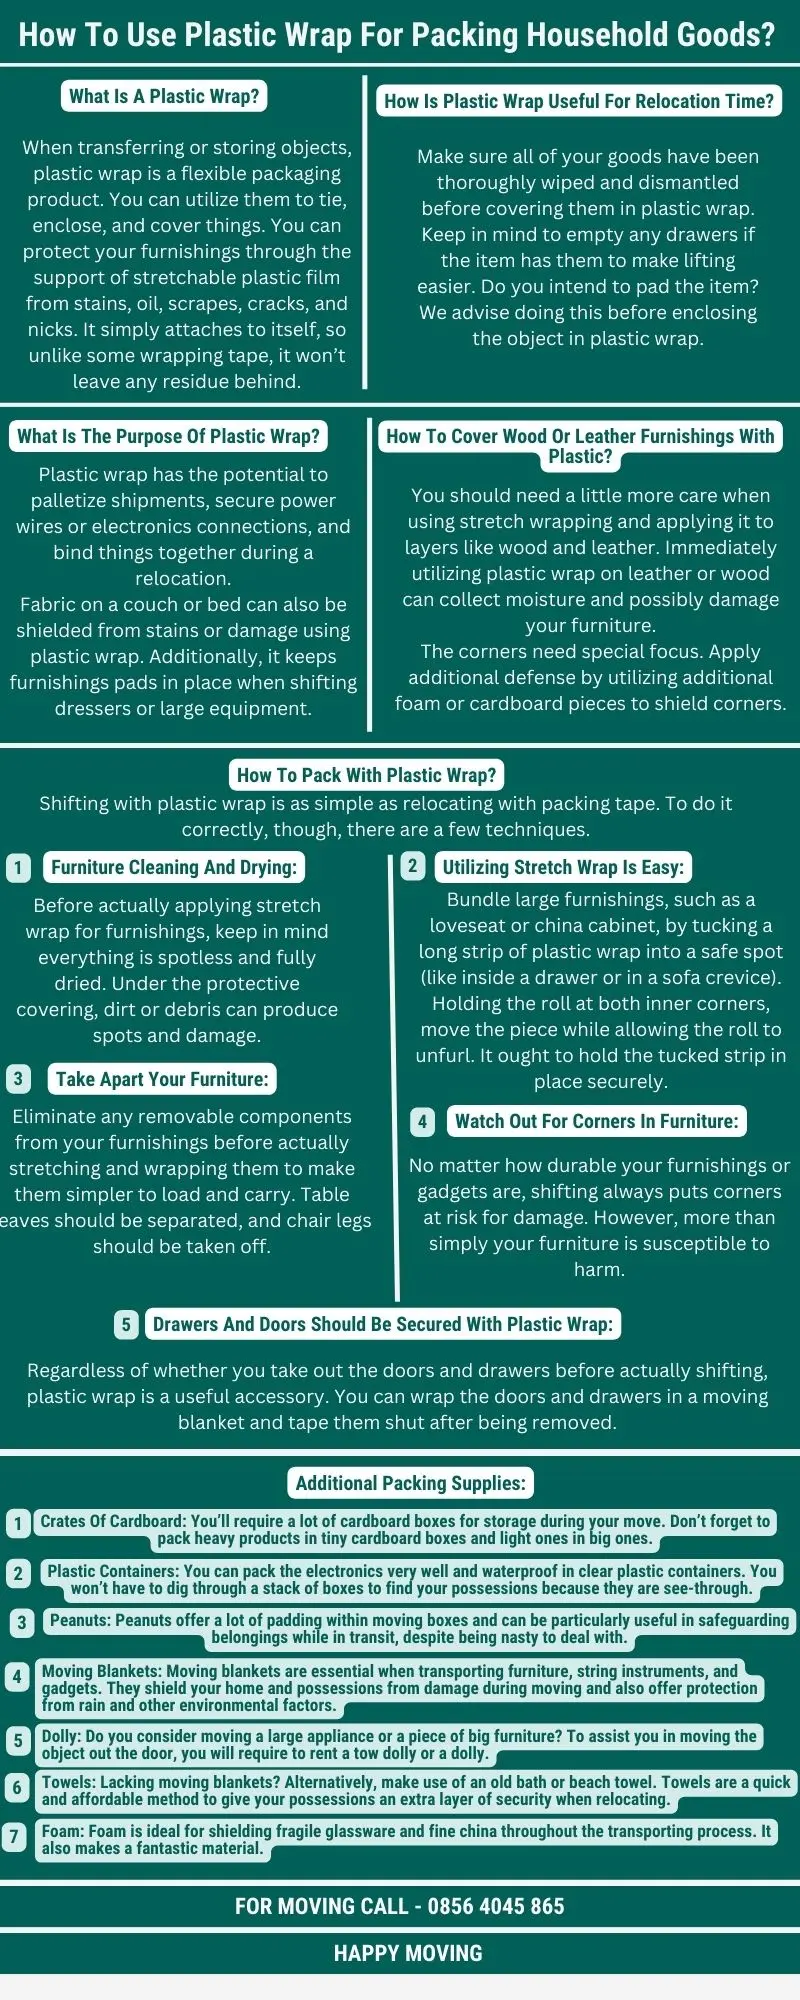 Infographic on How To Use Plastic Wrap For Packing Household Goods